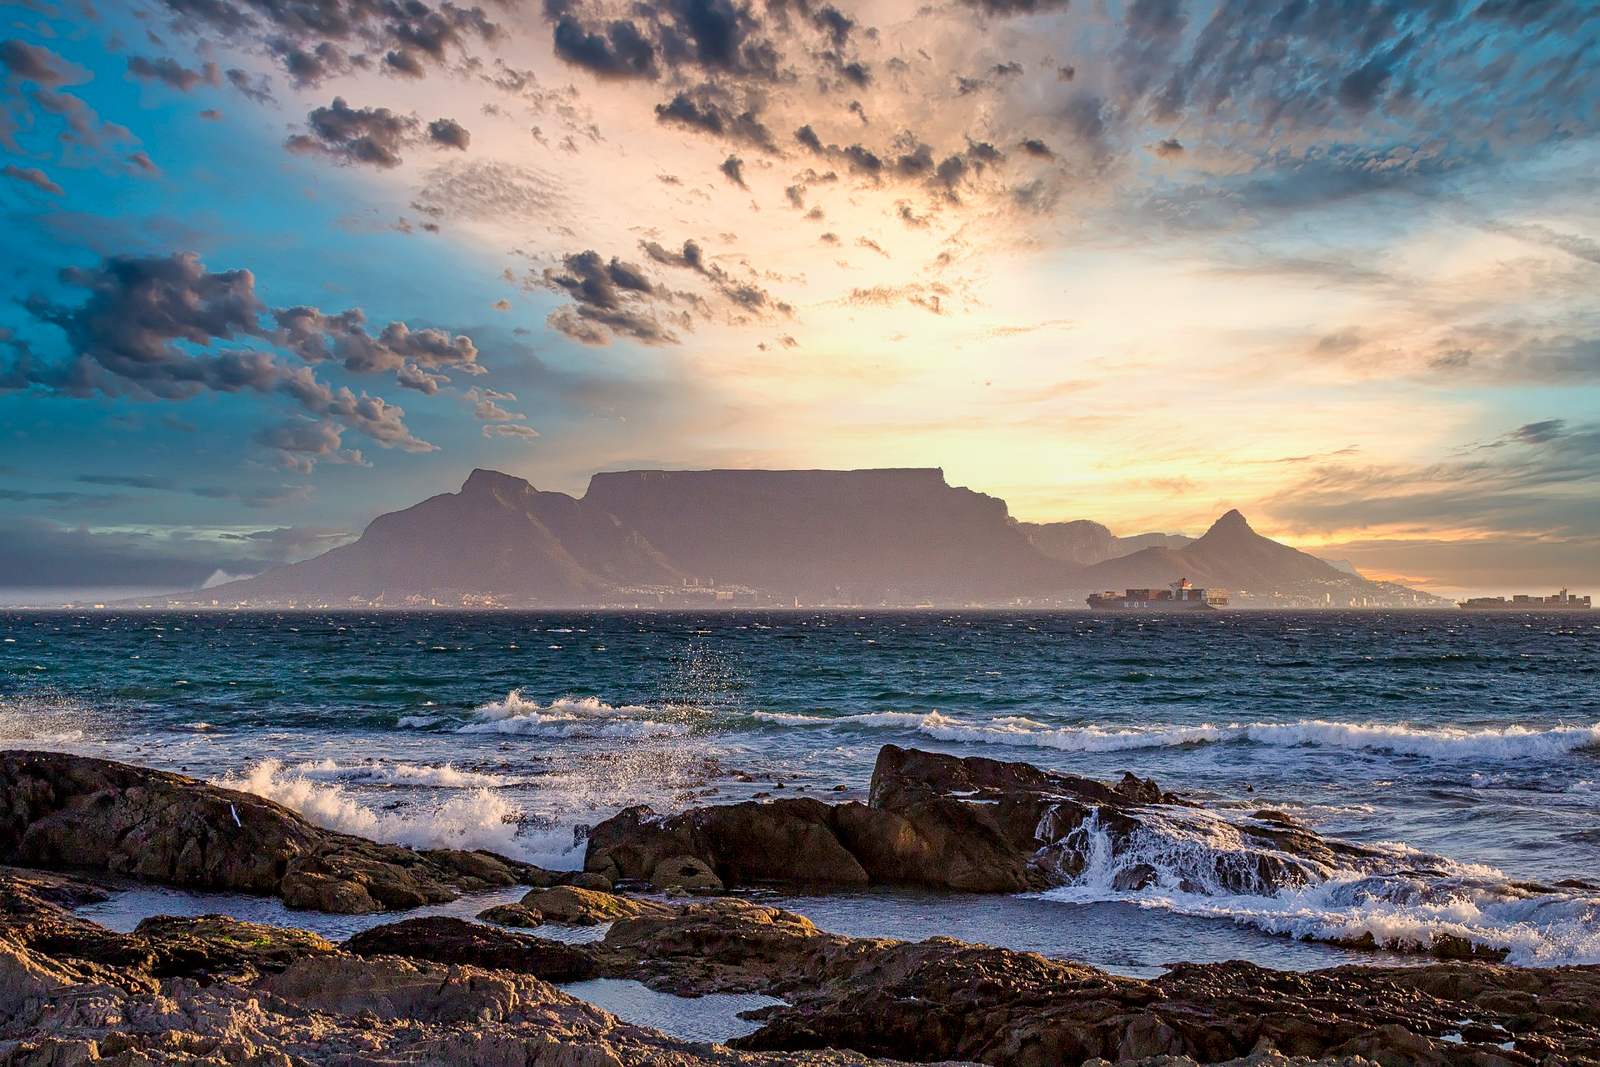 A view of Table Mountain in South Africa at sunset